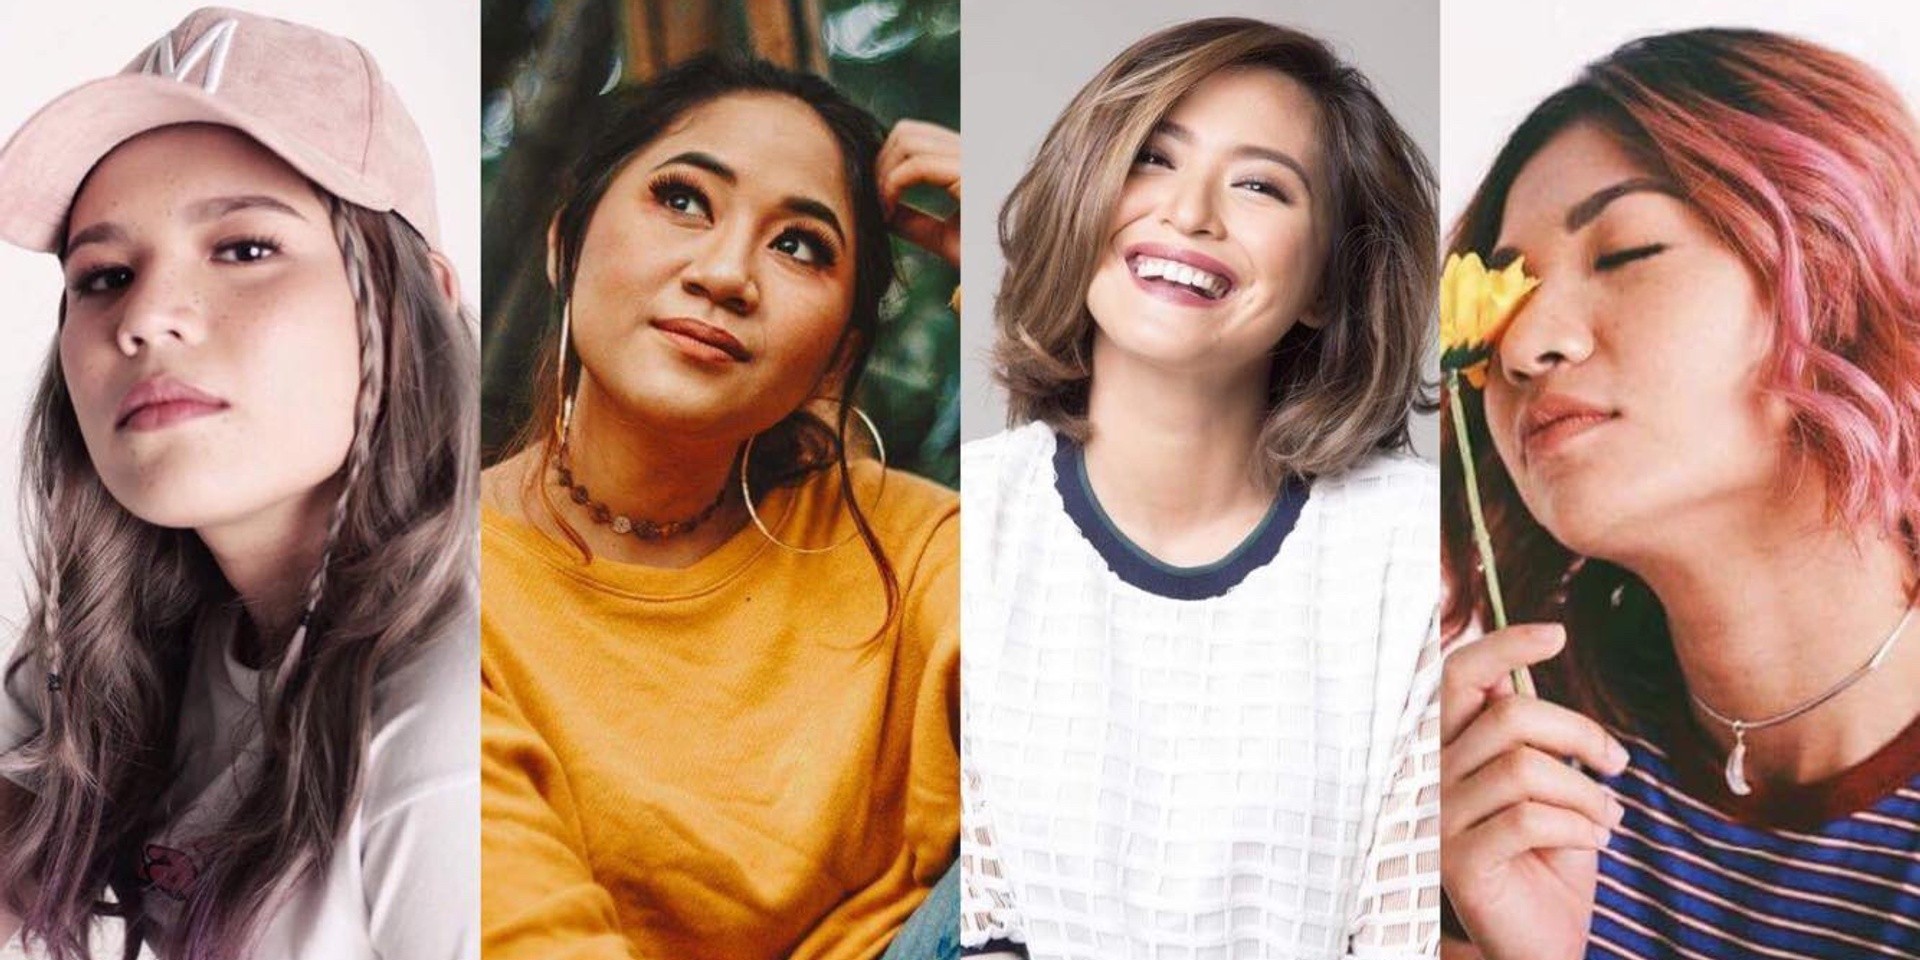 Joyce Pring, Coeli, Leanne and Naara, and more celebrate beauty at Glamcon MNL 2018